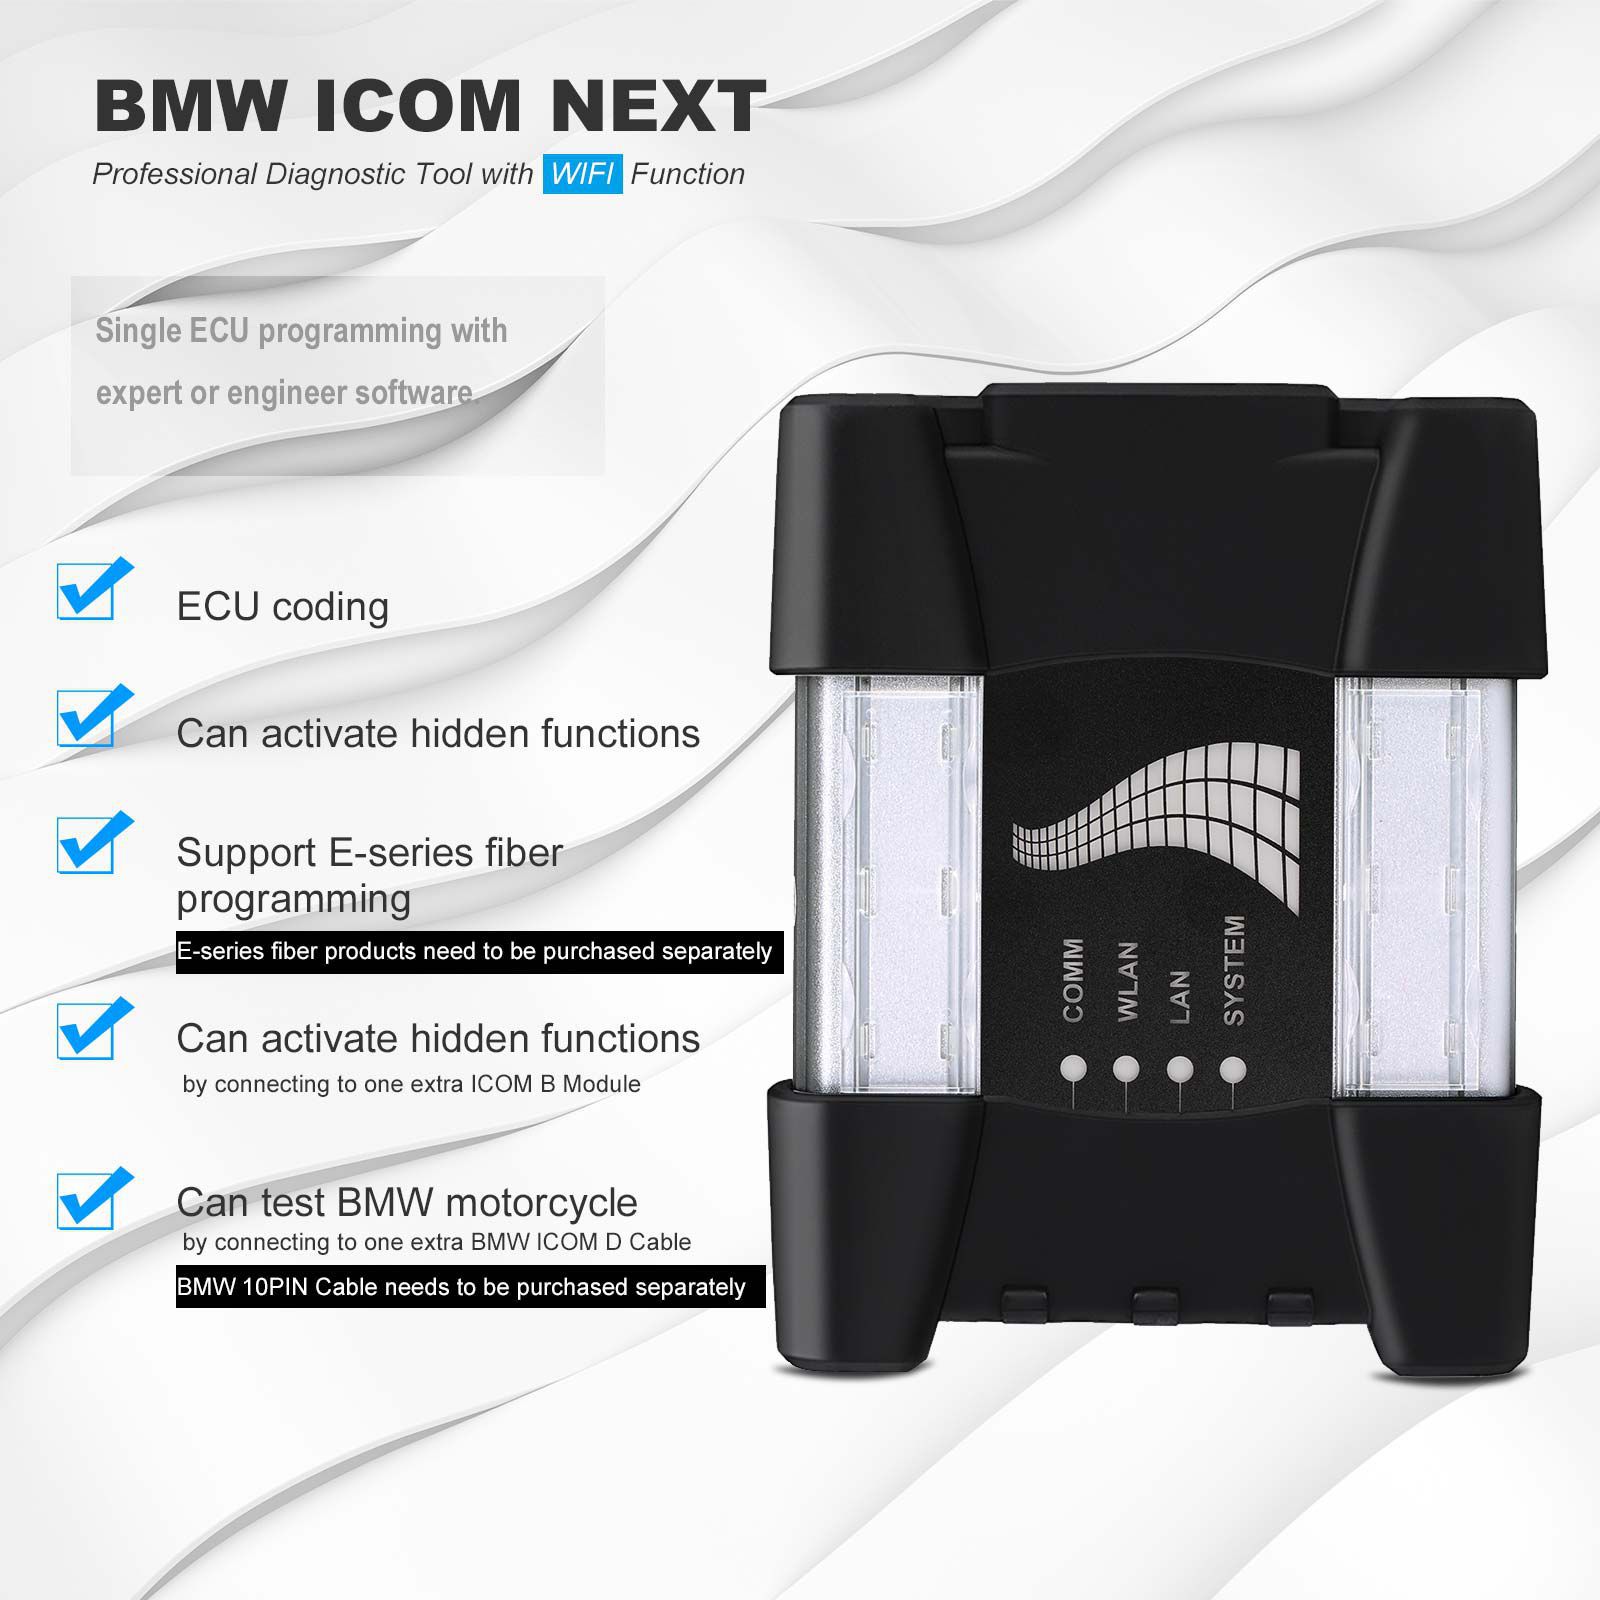 BMW ICOM NEXT Professional Diagnostic Tool with WIFI Function